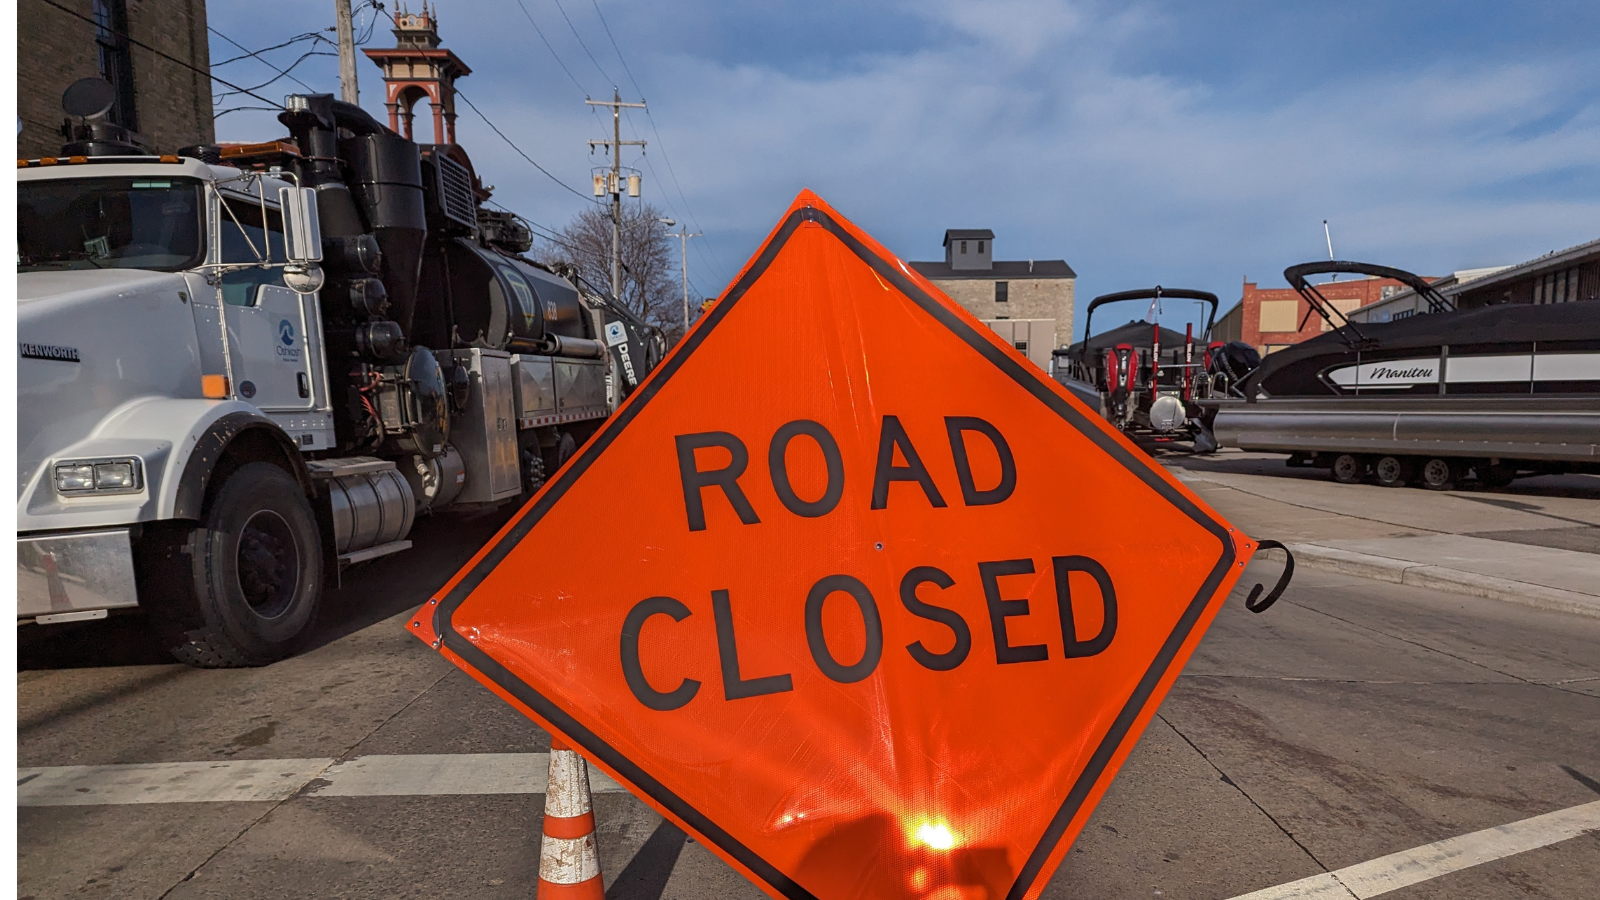 Maintenance and construction causes road closures in NEW